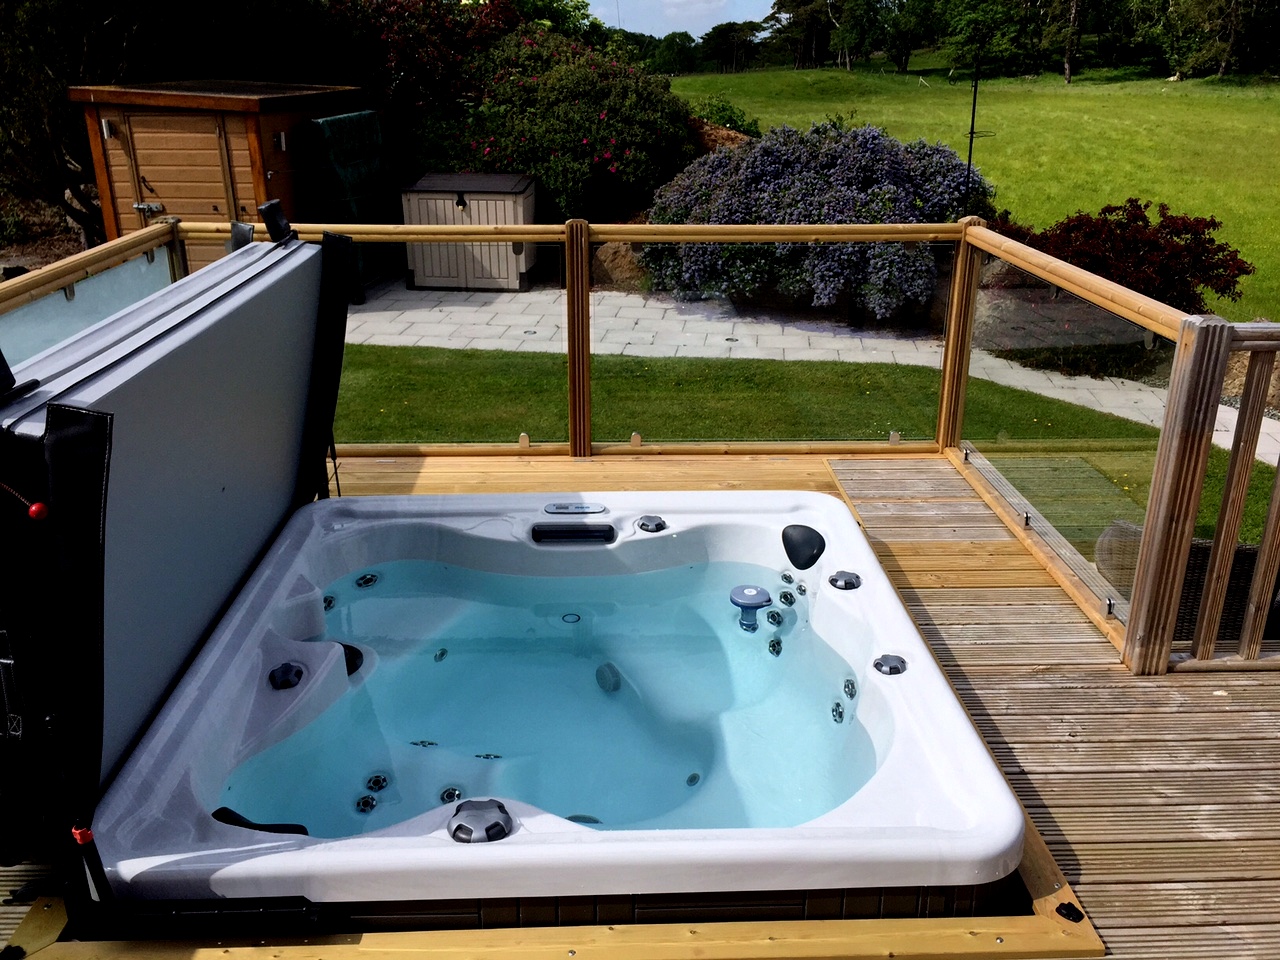 Marquis Spas Celebrity Broadway Hot Tub sunken in a decking with cover open